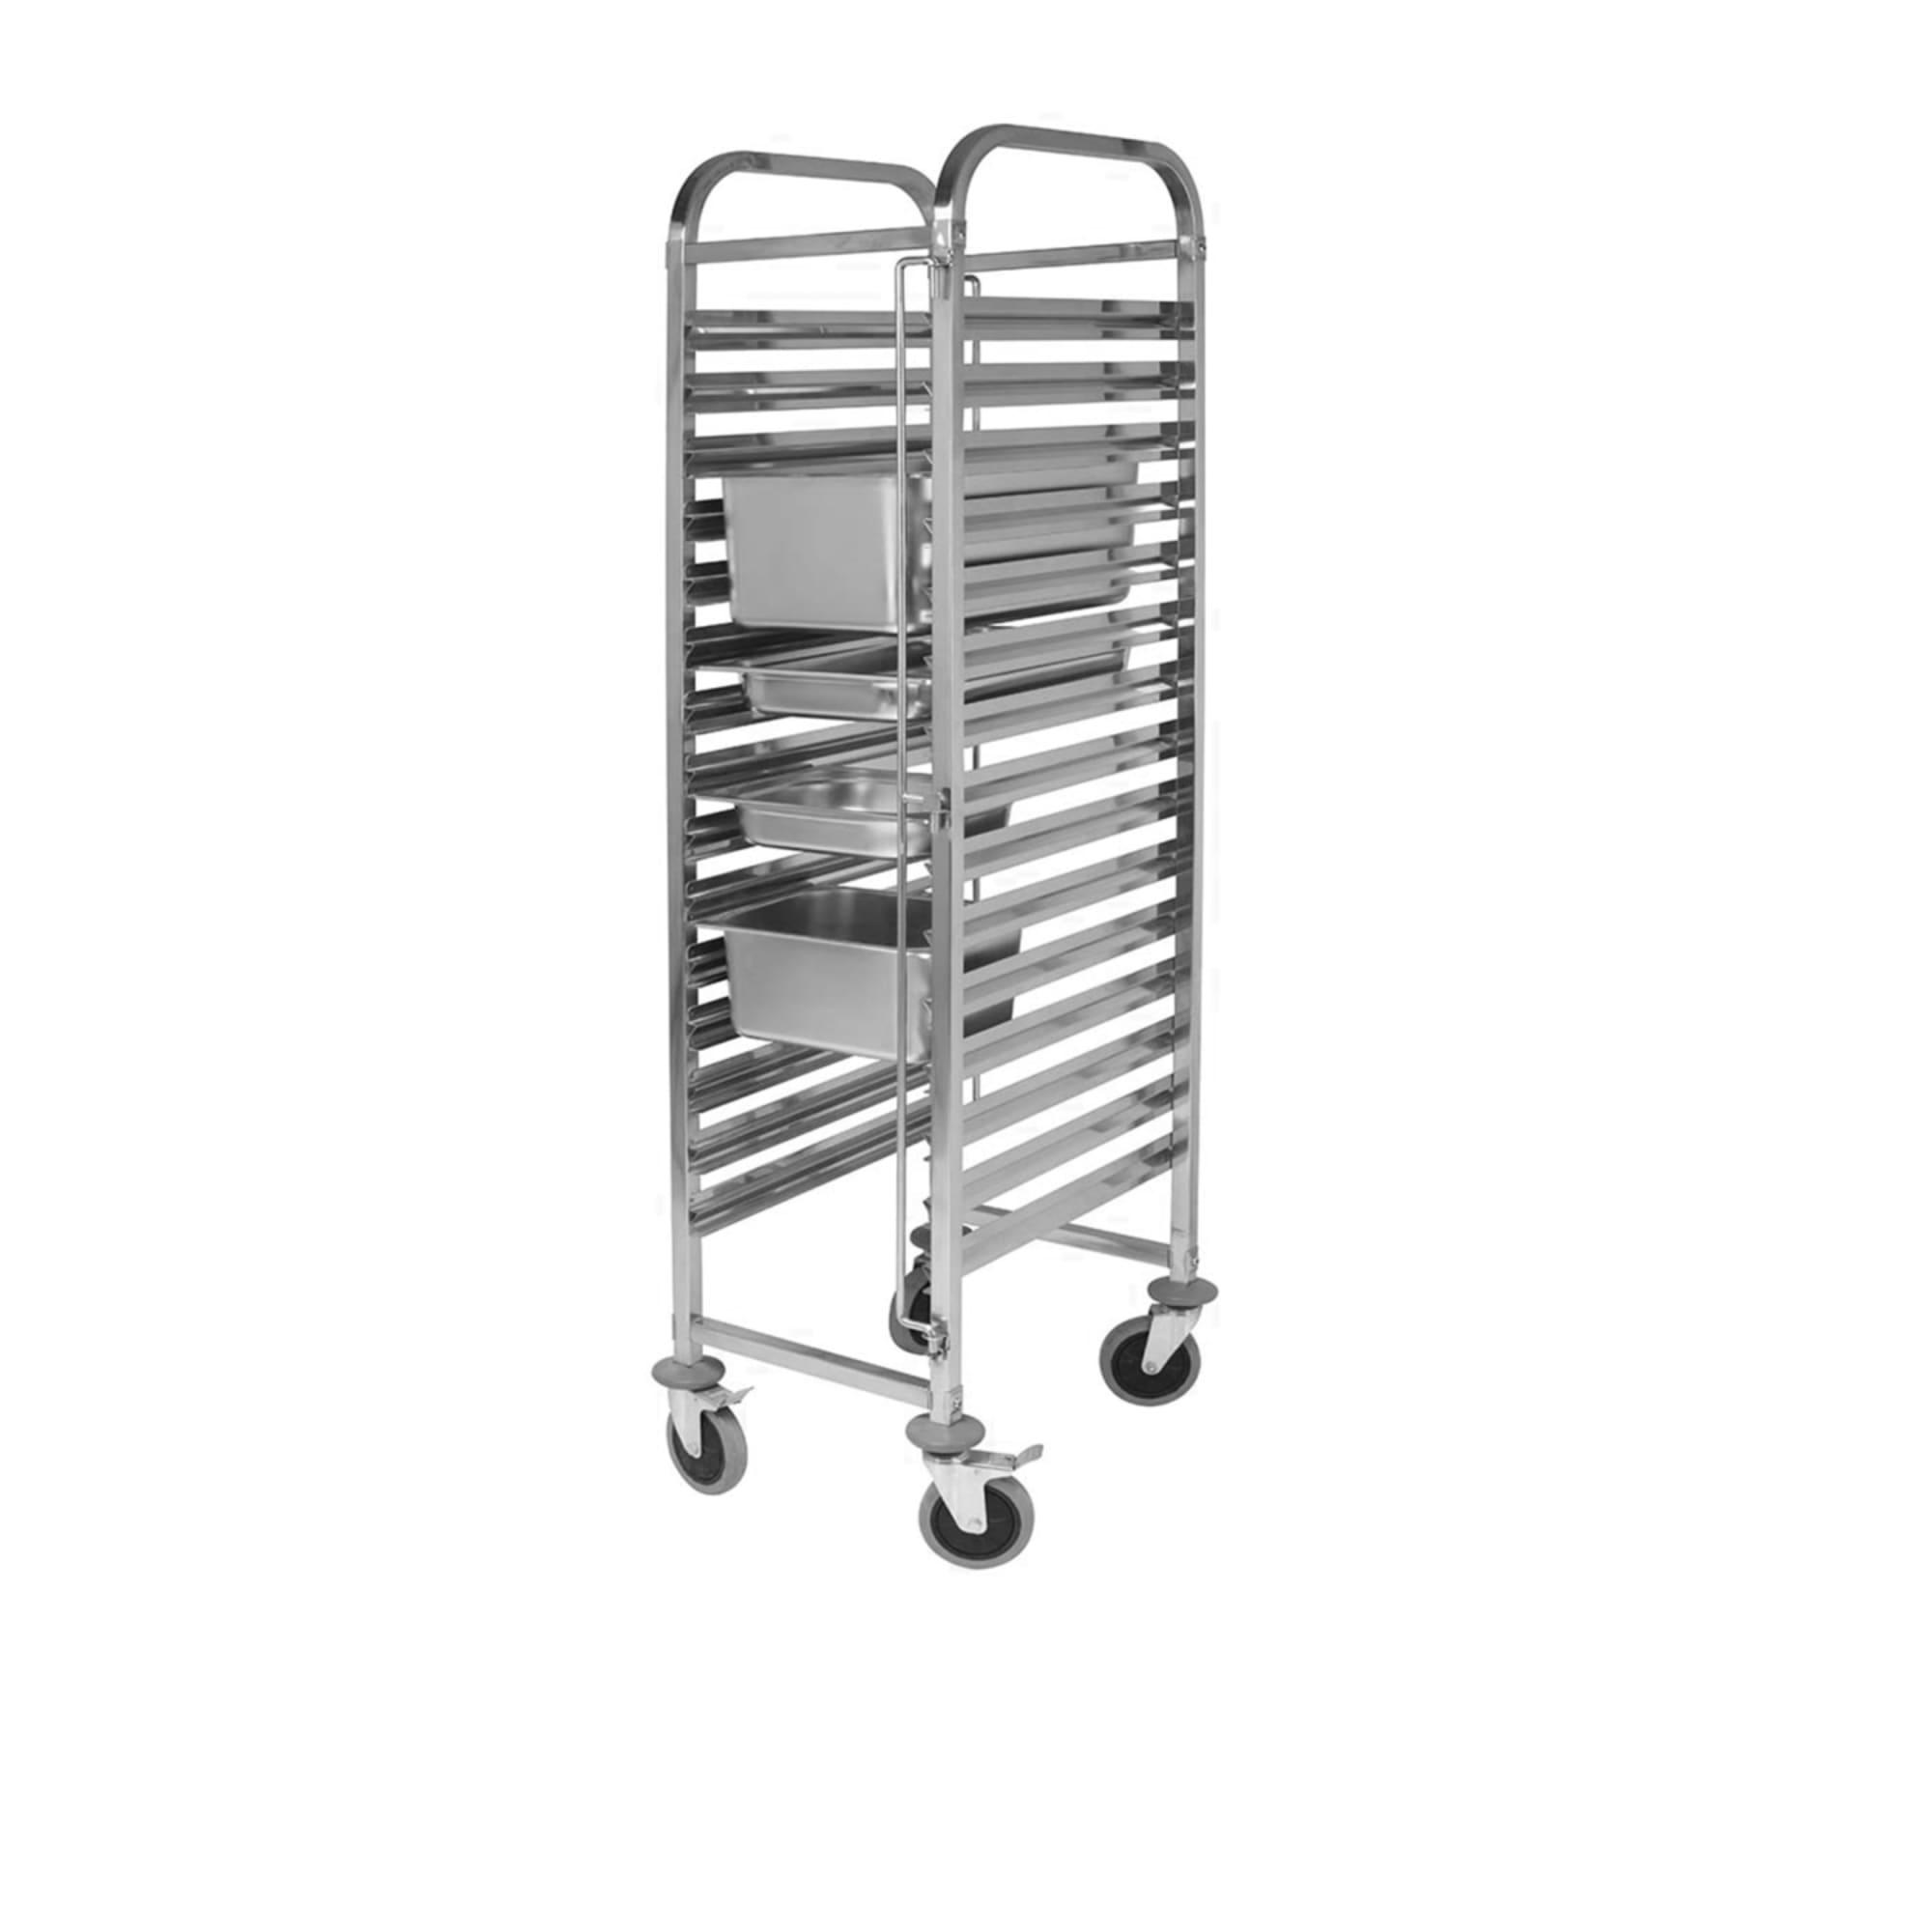 Soga Stainless Steel Gastronorm Trolley 15 Tier Suits GN 1/1 Pans Image 1